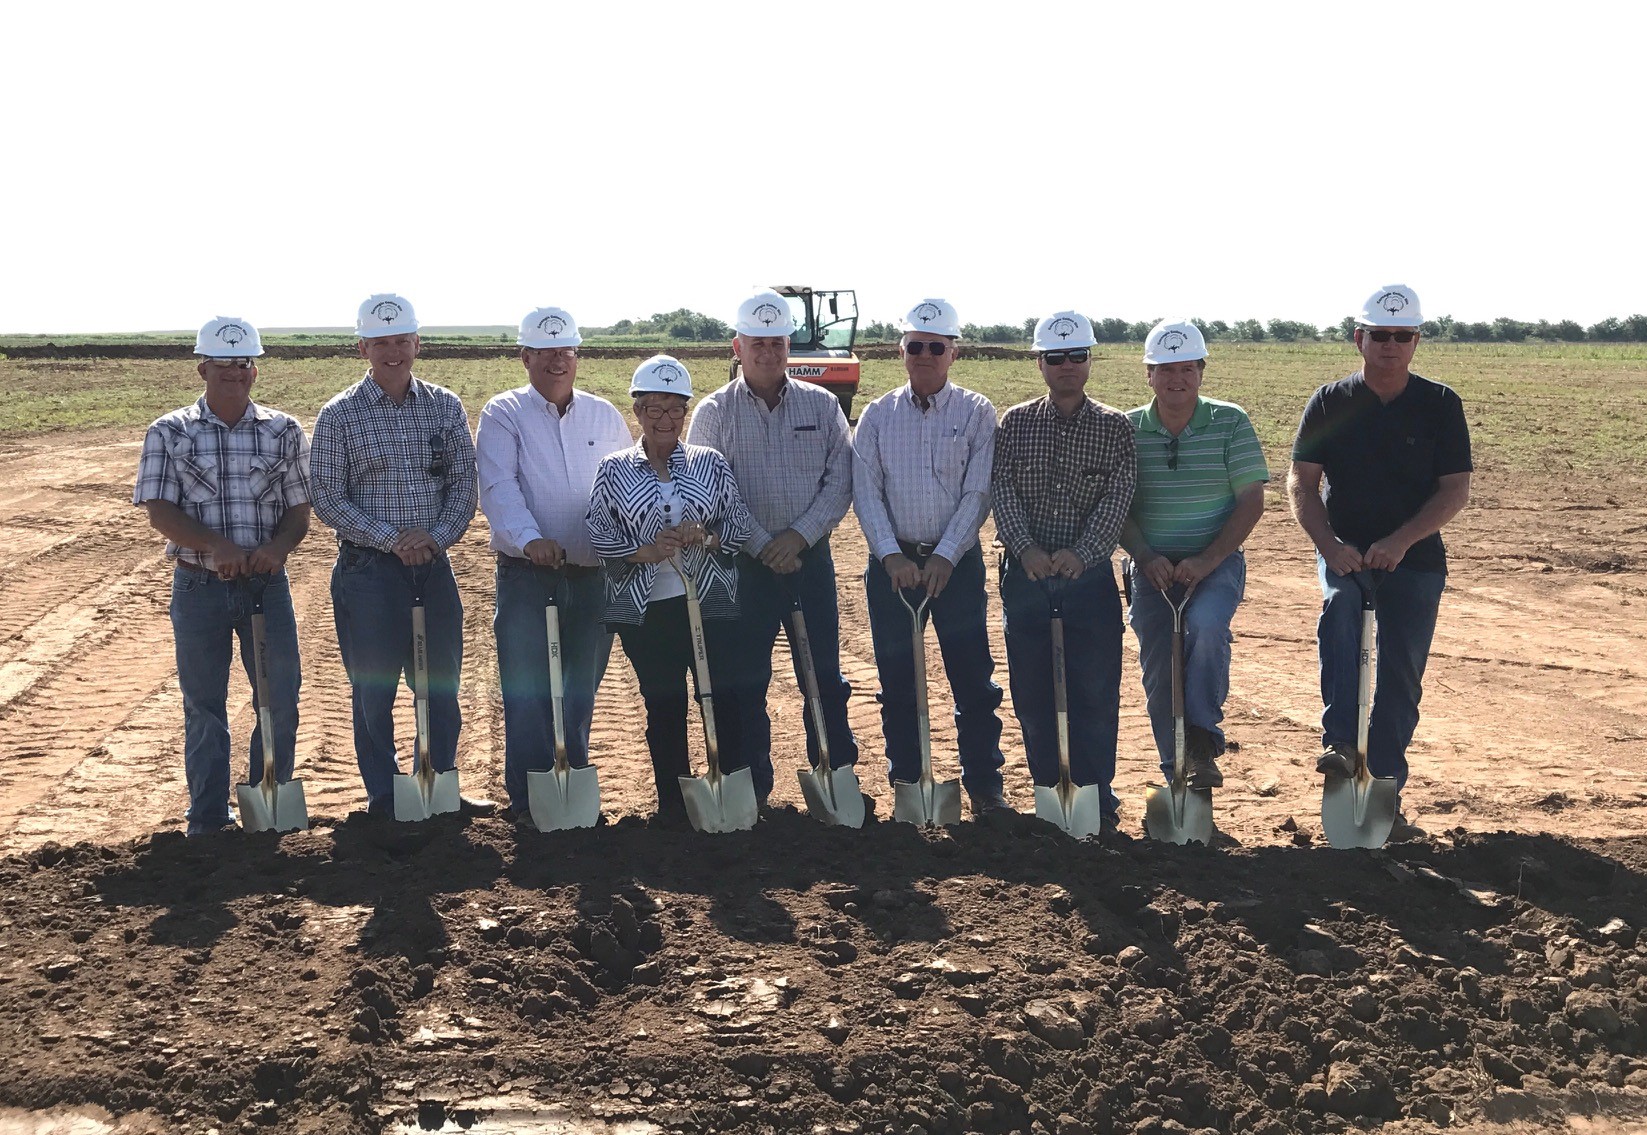 Carnegie Co-op Breaks Ground on State-of-the-Art Cotton Gin Facility Amid Cottons Rise in Oklahoma